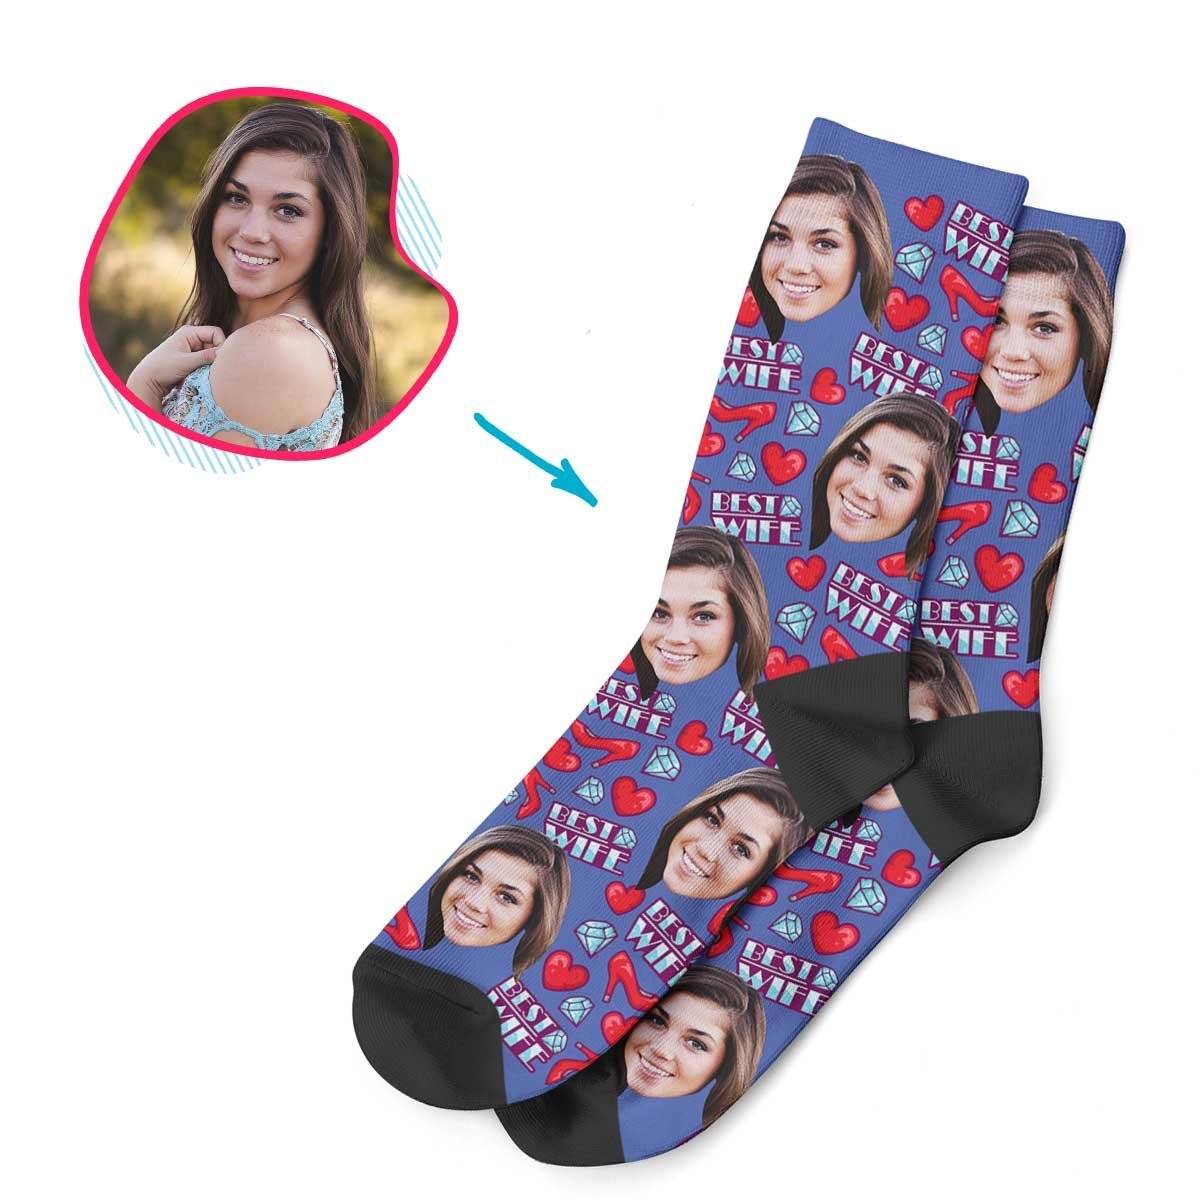 Darkblue Wife personalized socks with photo of face printed on them